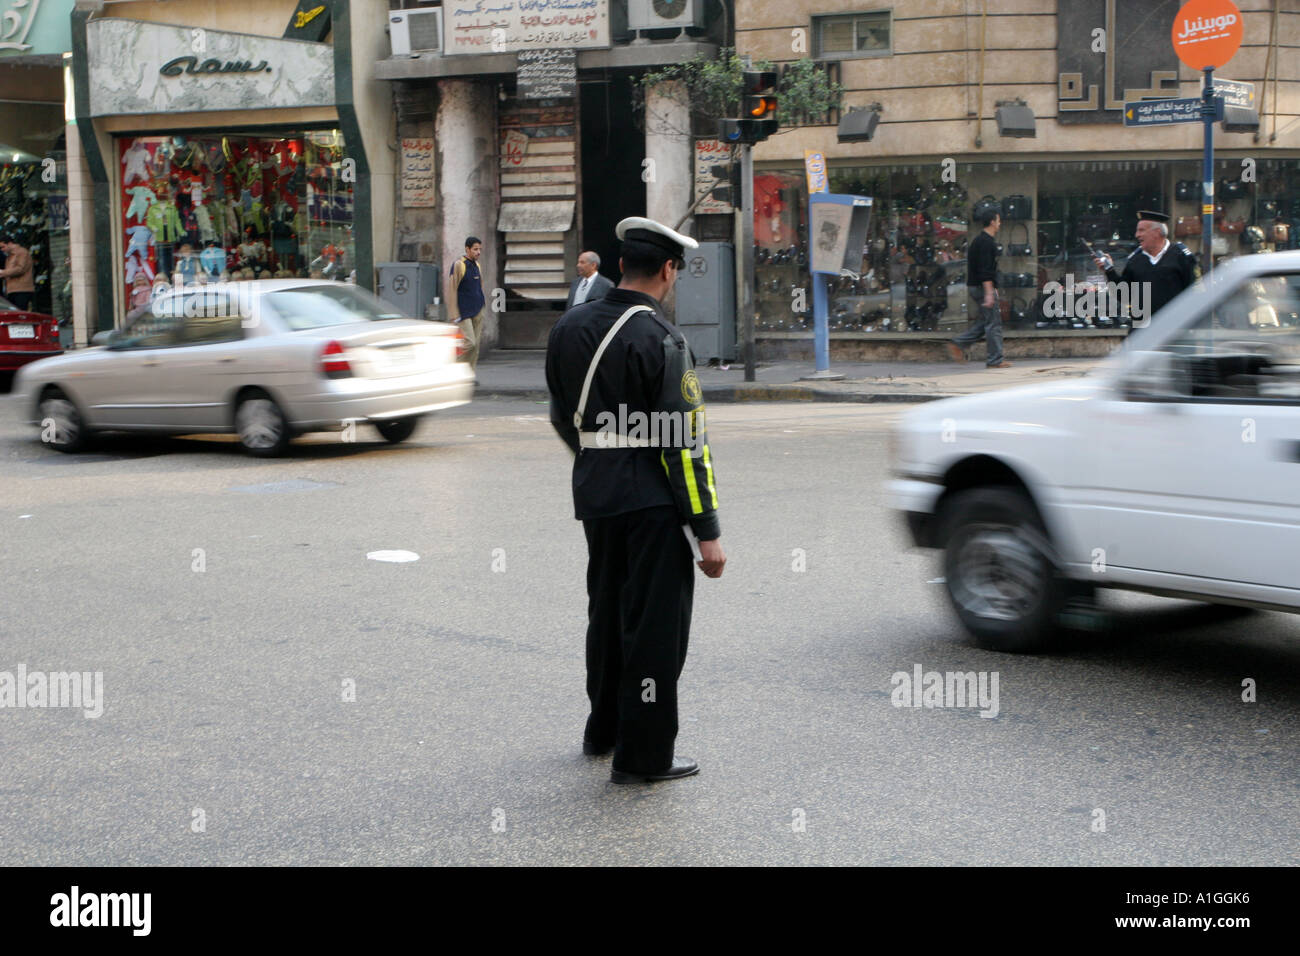 A Traffic warden directs traffic in Cairo’s downtown district. Stock Photo